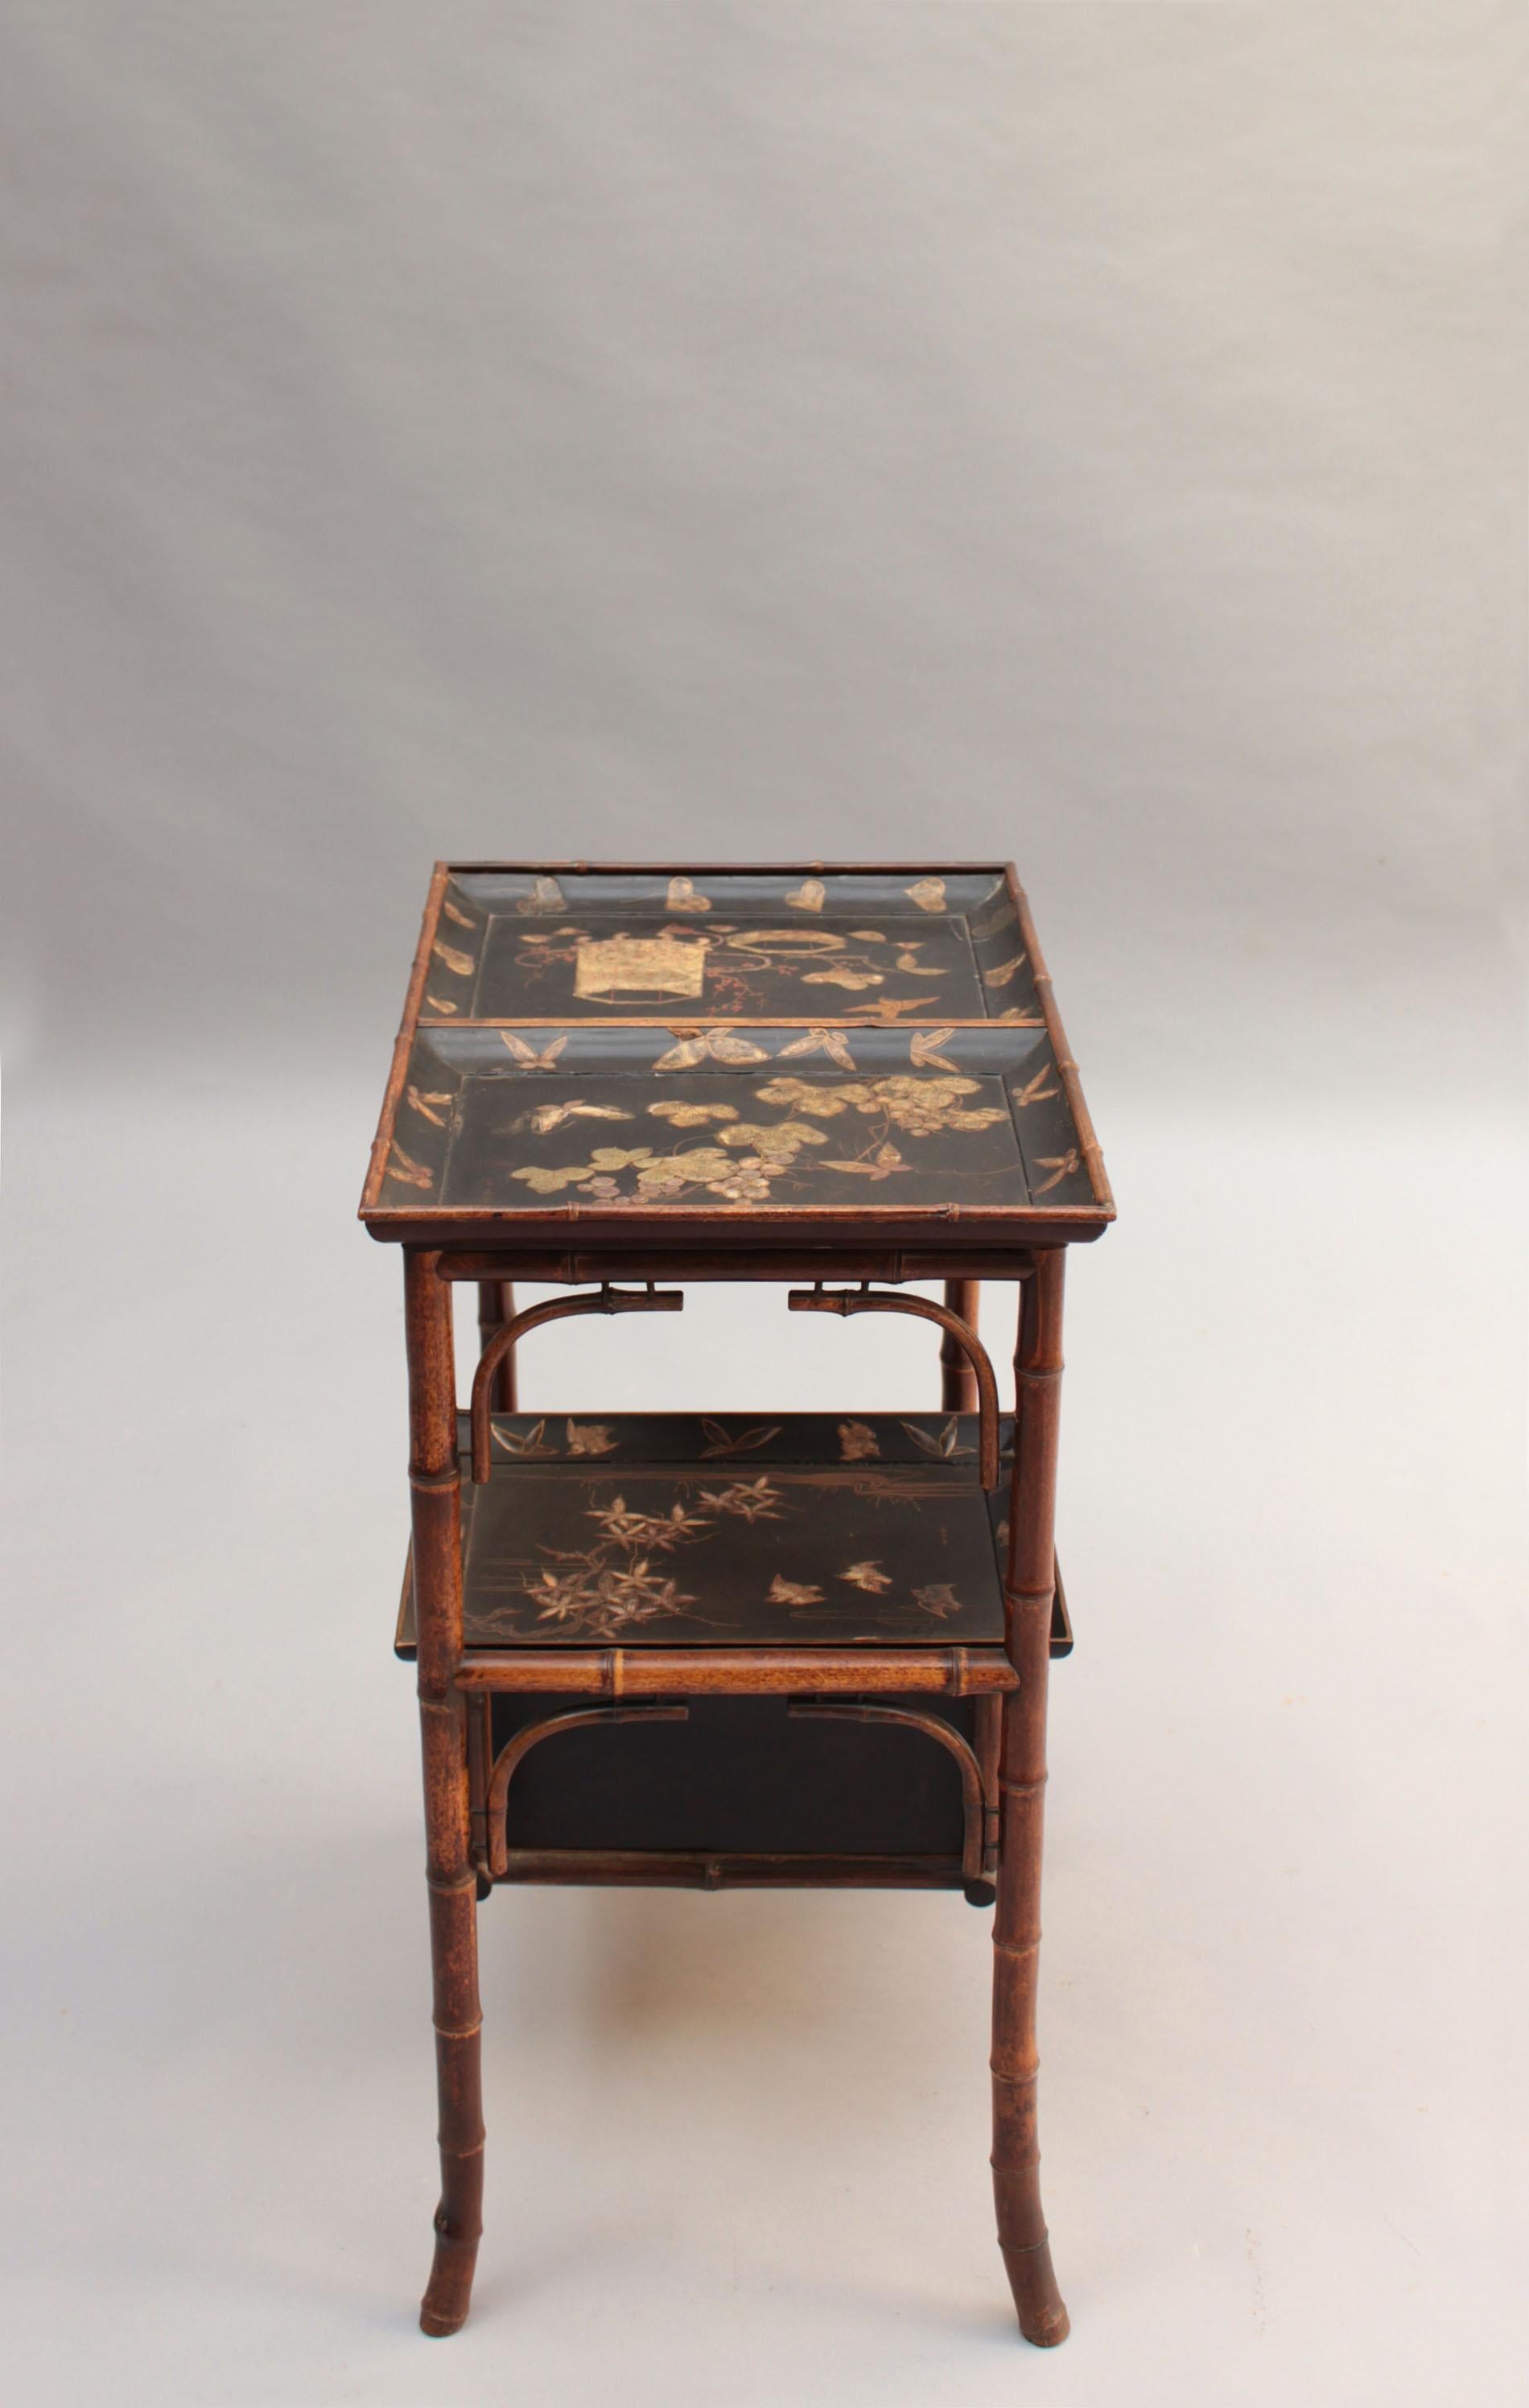 Fine French Japonisme Lacquered Side Table with Shagreen Inlays For Sale 3